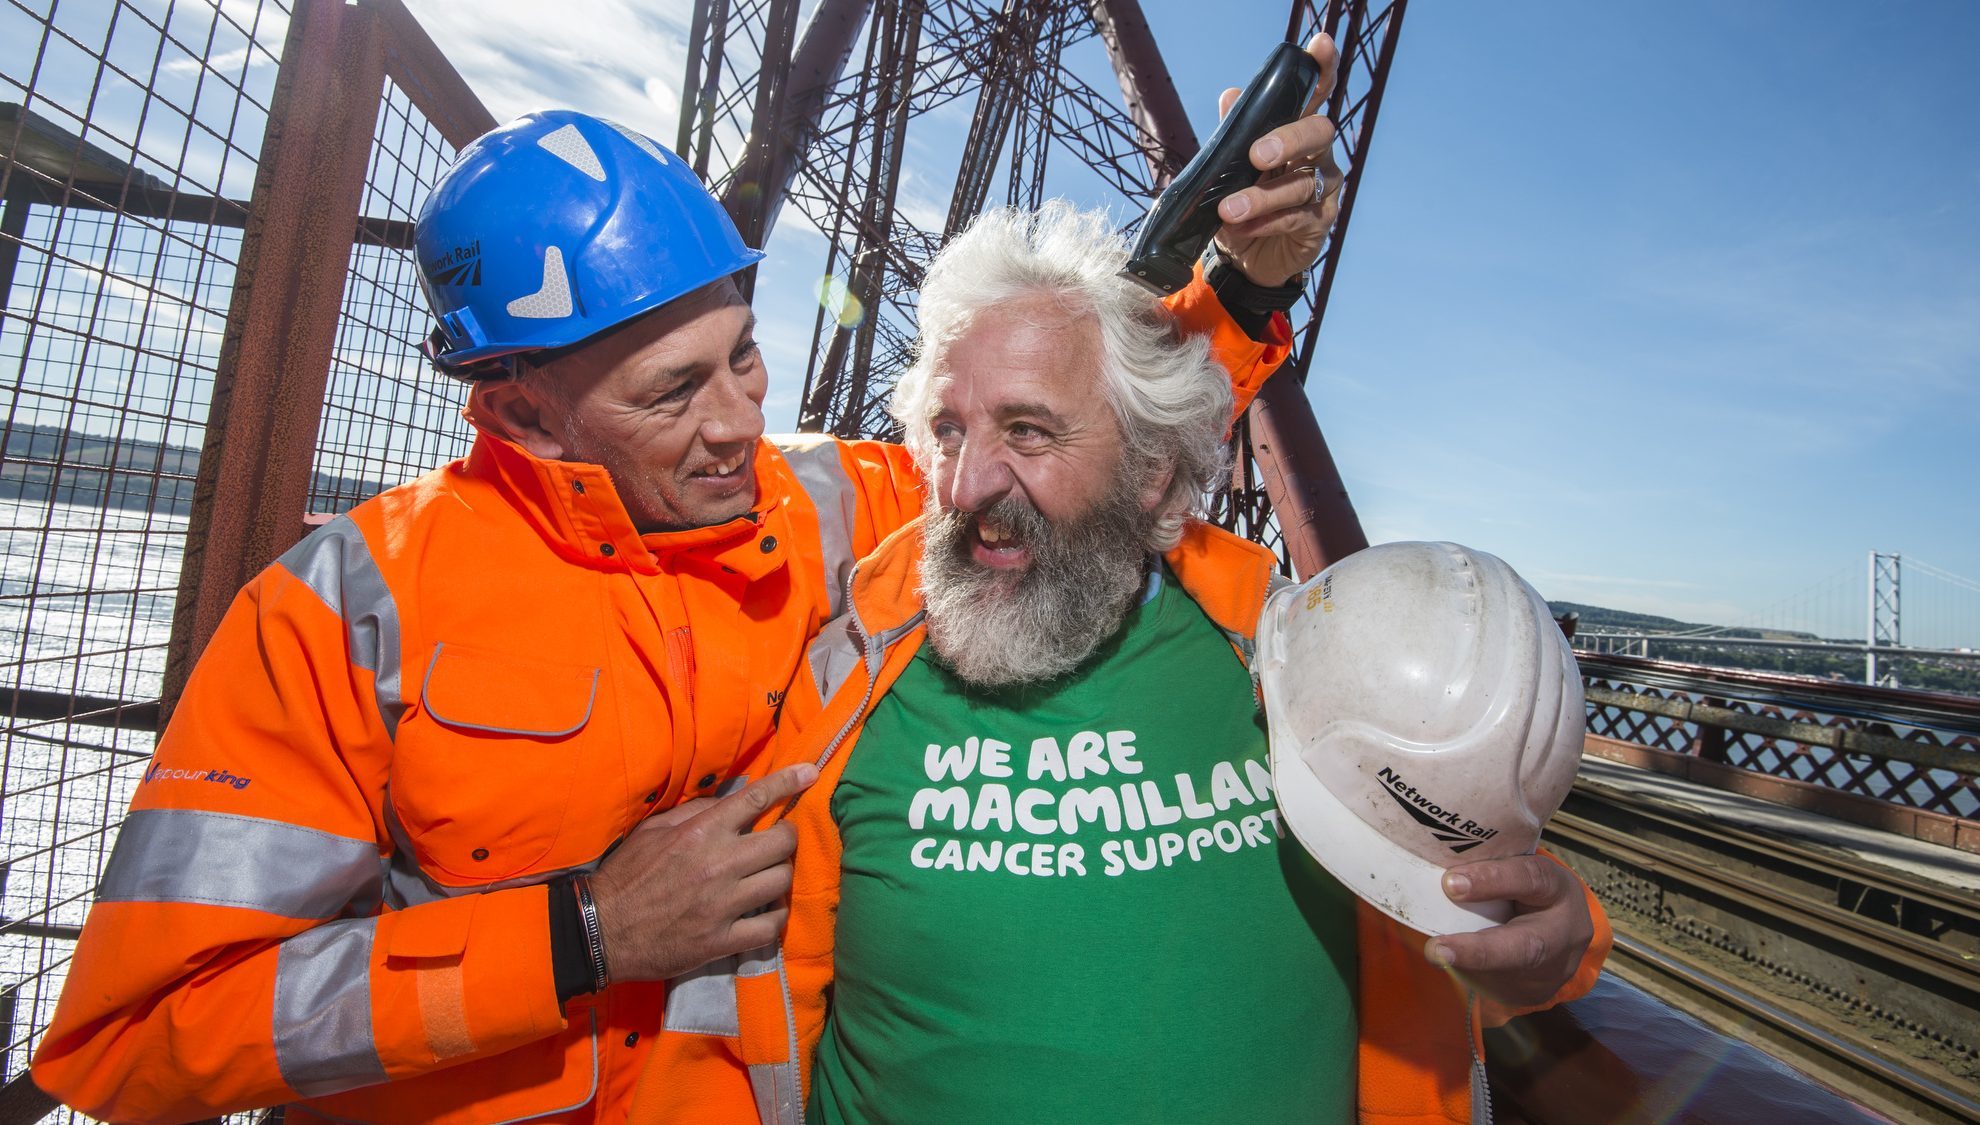 Network Rail employee Davie O'Donnell had a close shave with Rangers legend Mark Hateley on top of the Forth Rail Bridge.